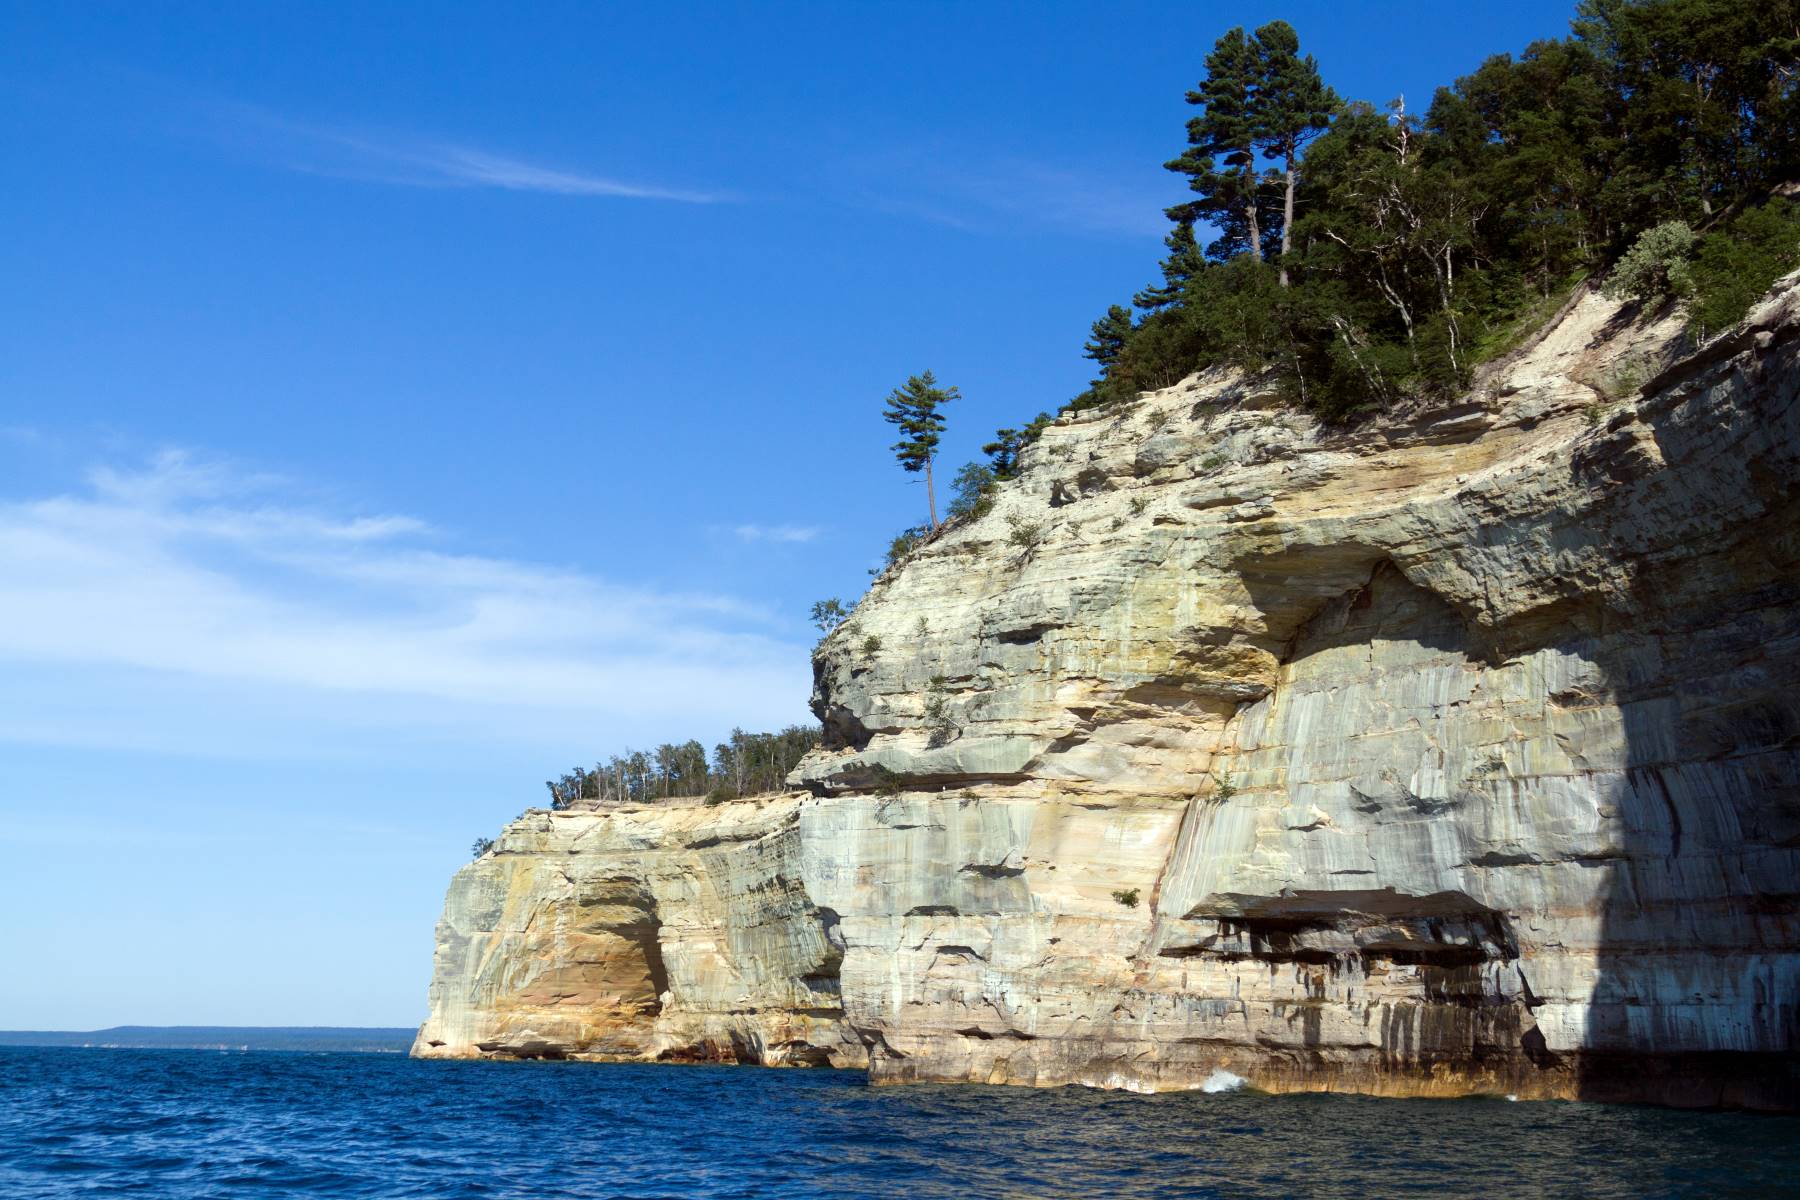 Pictured Rocks in the Upper Peninsula of Michigan have some of best views of their hiking trails